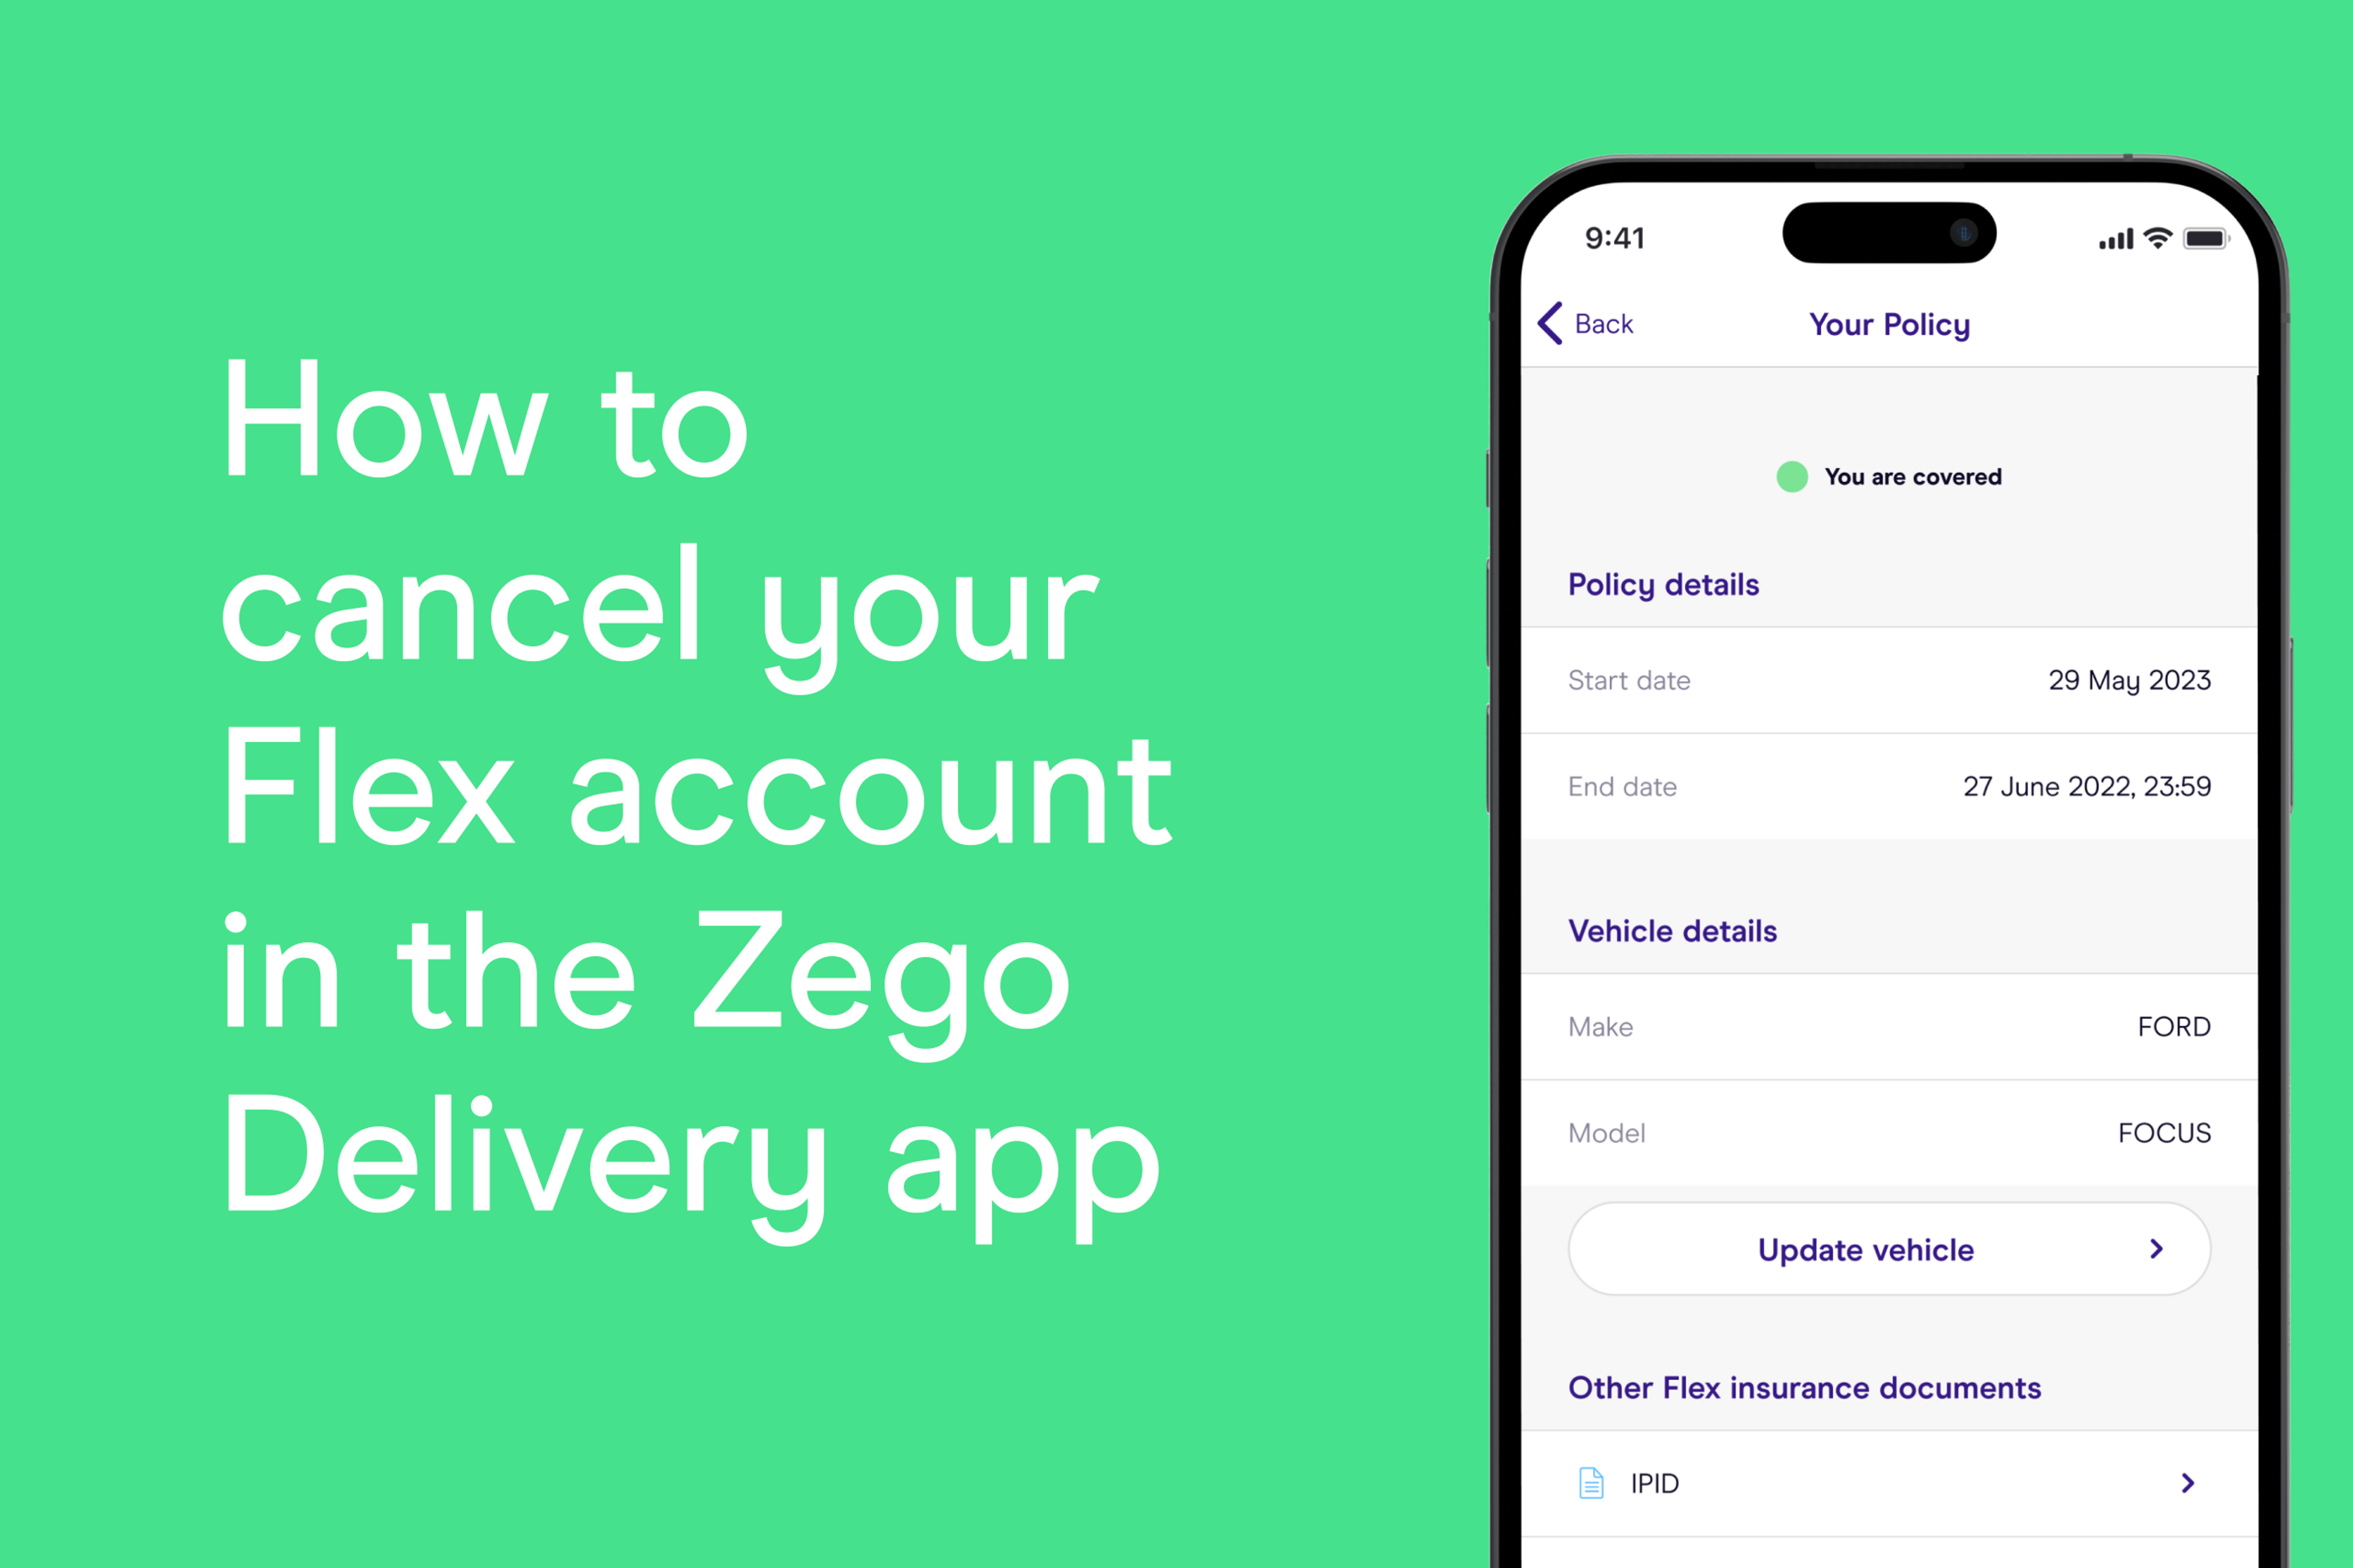 How to cancel your Flex account in the Zego Delivery app